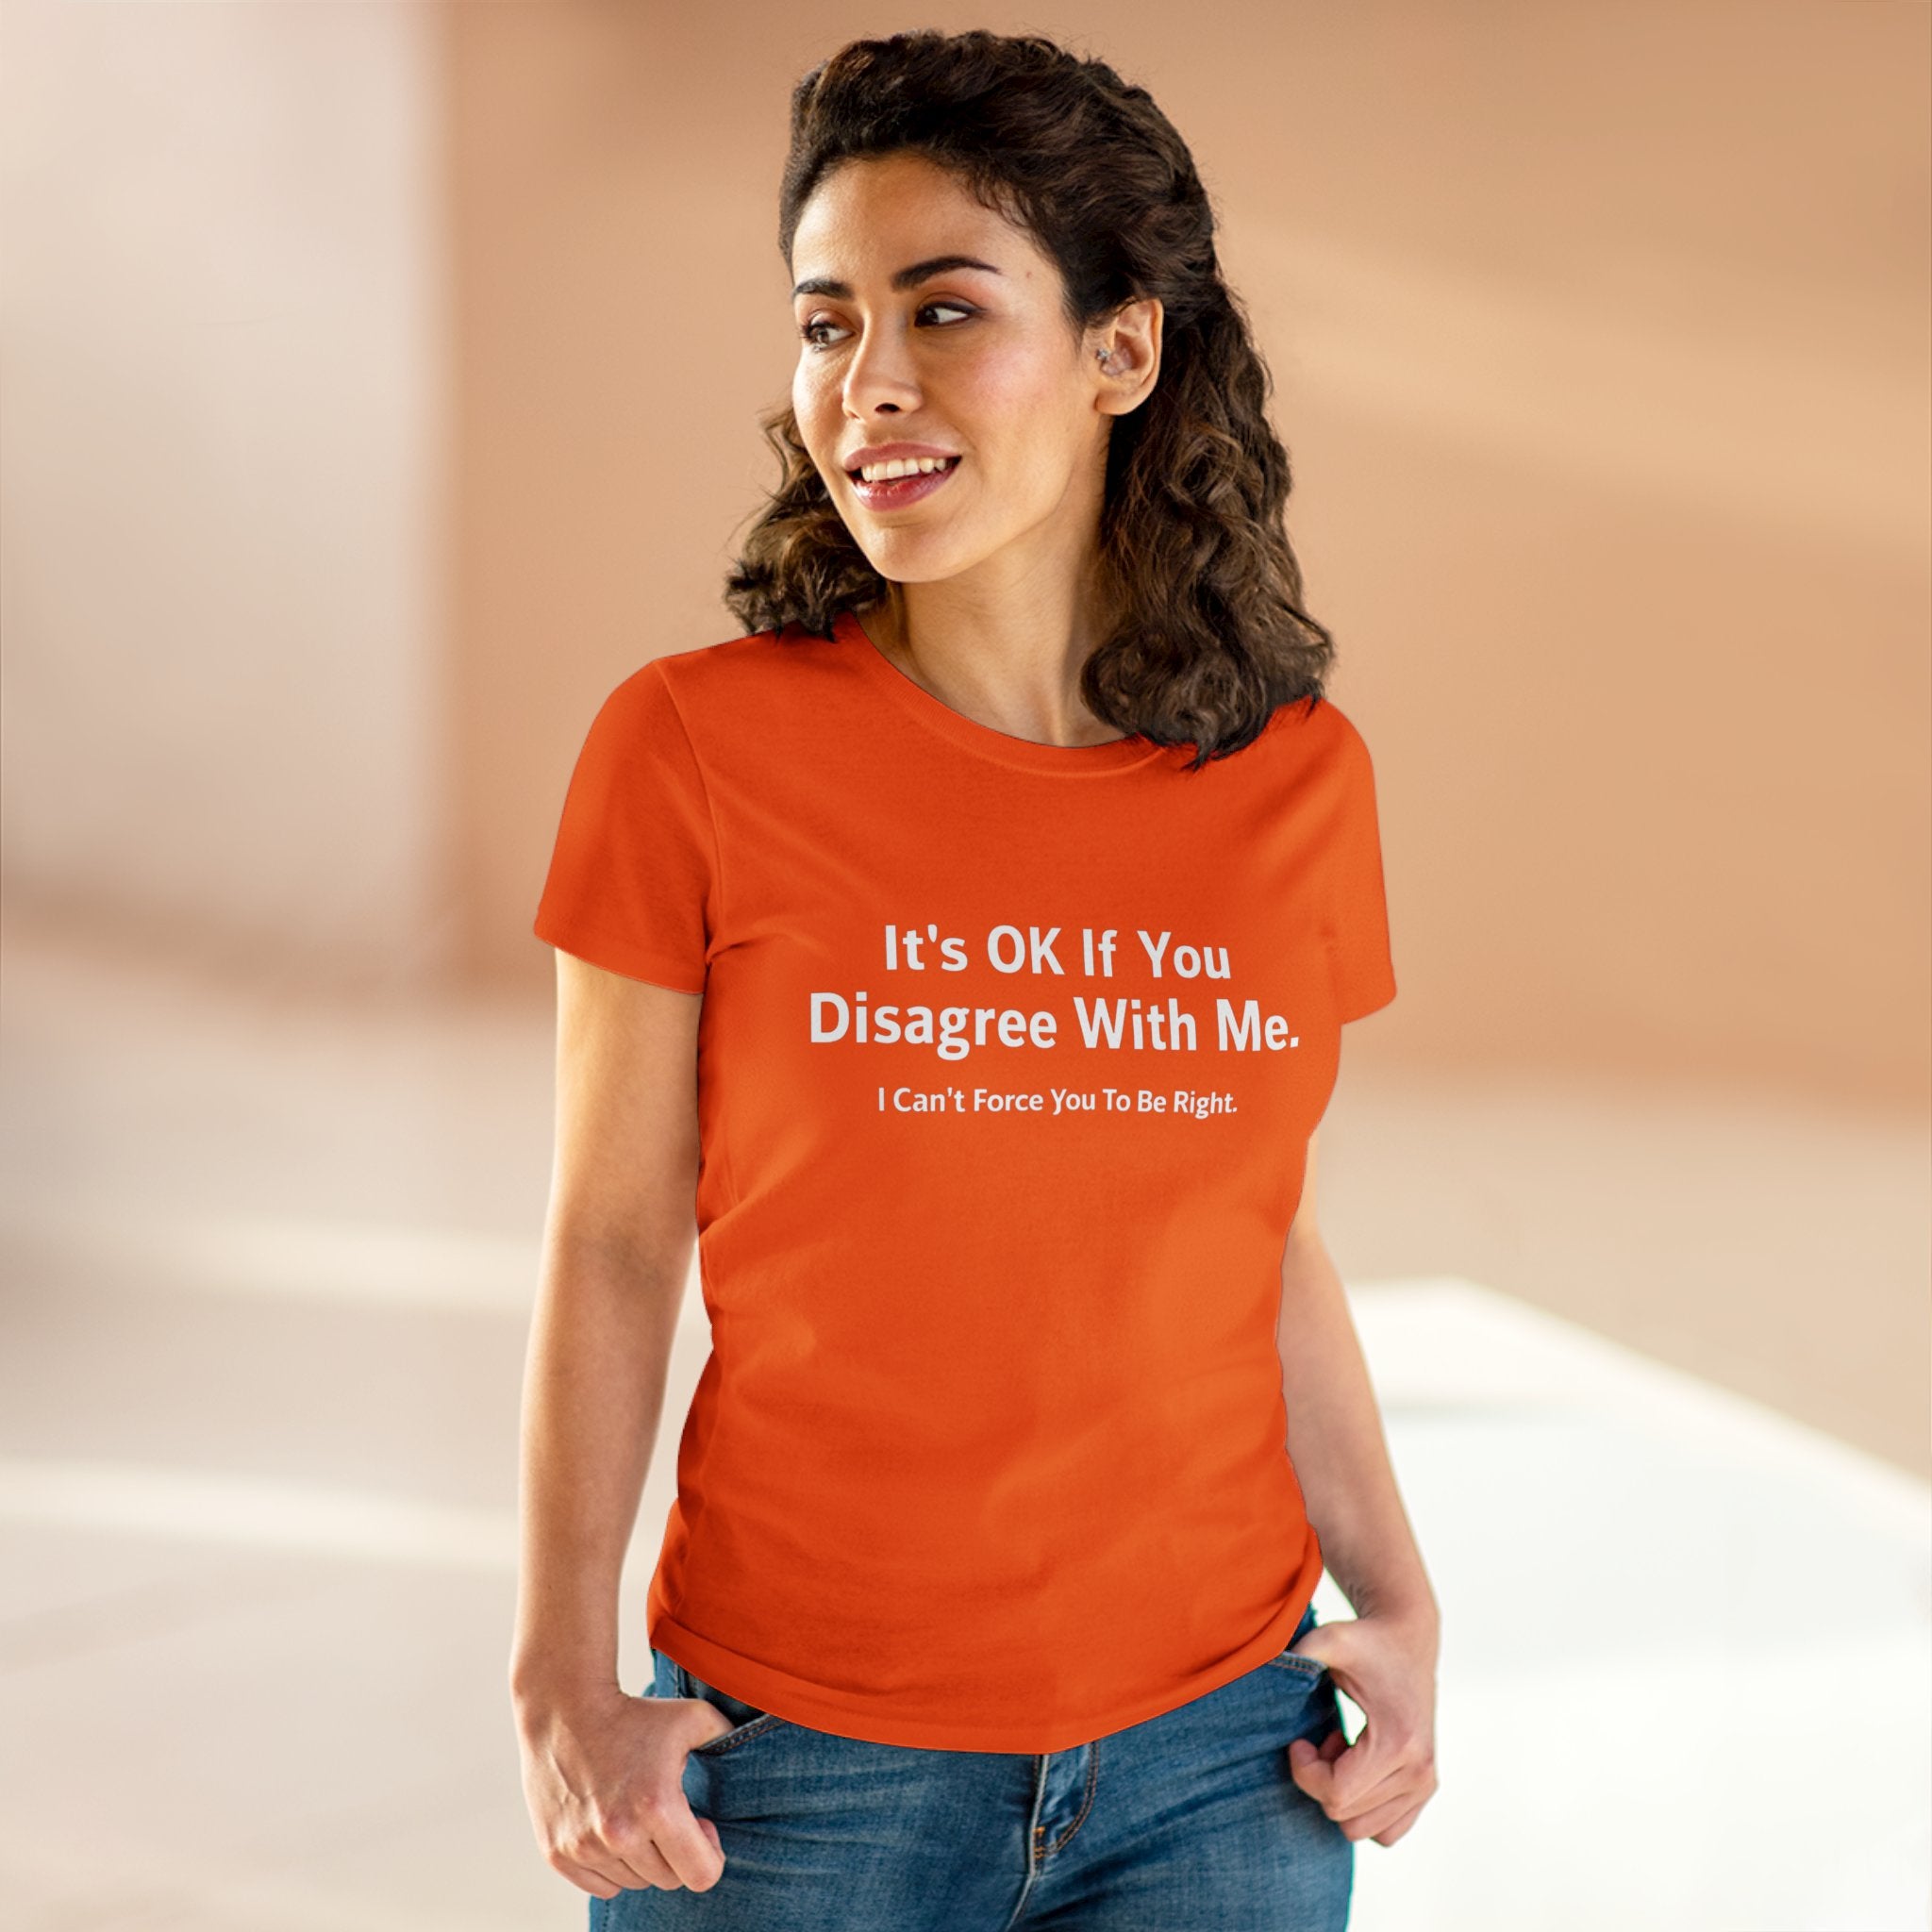 A person wearing a pre-shrunk orange It's Ok If You Disagree With Me - Women's Tee with the empowering print, "It's OK If You Disagree With Me. I Can't Force You To Be Right," standing in front of a plain background.